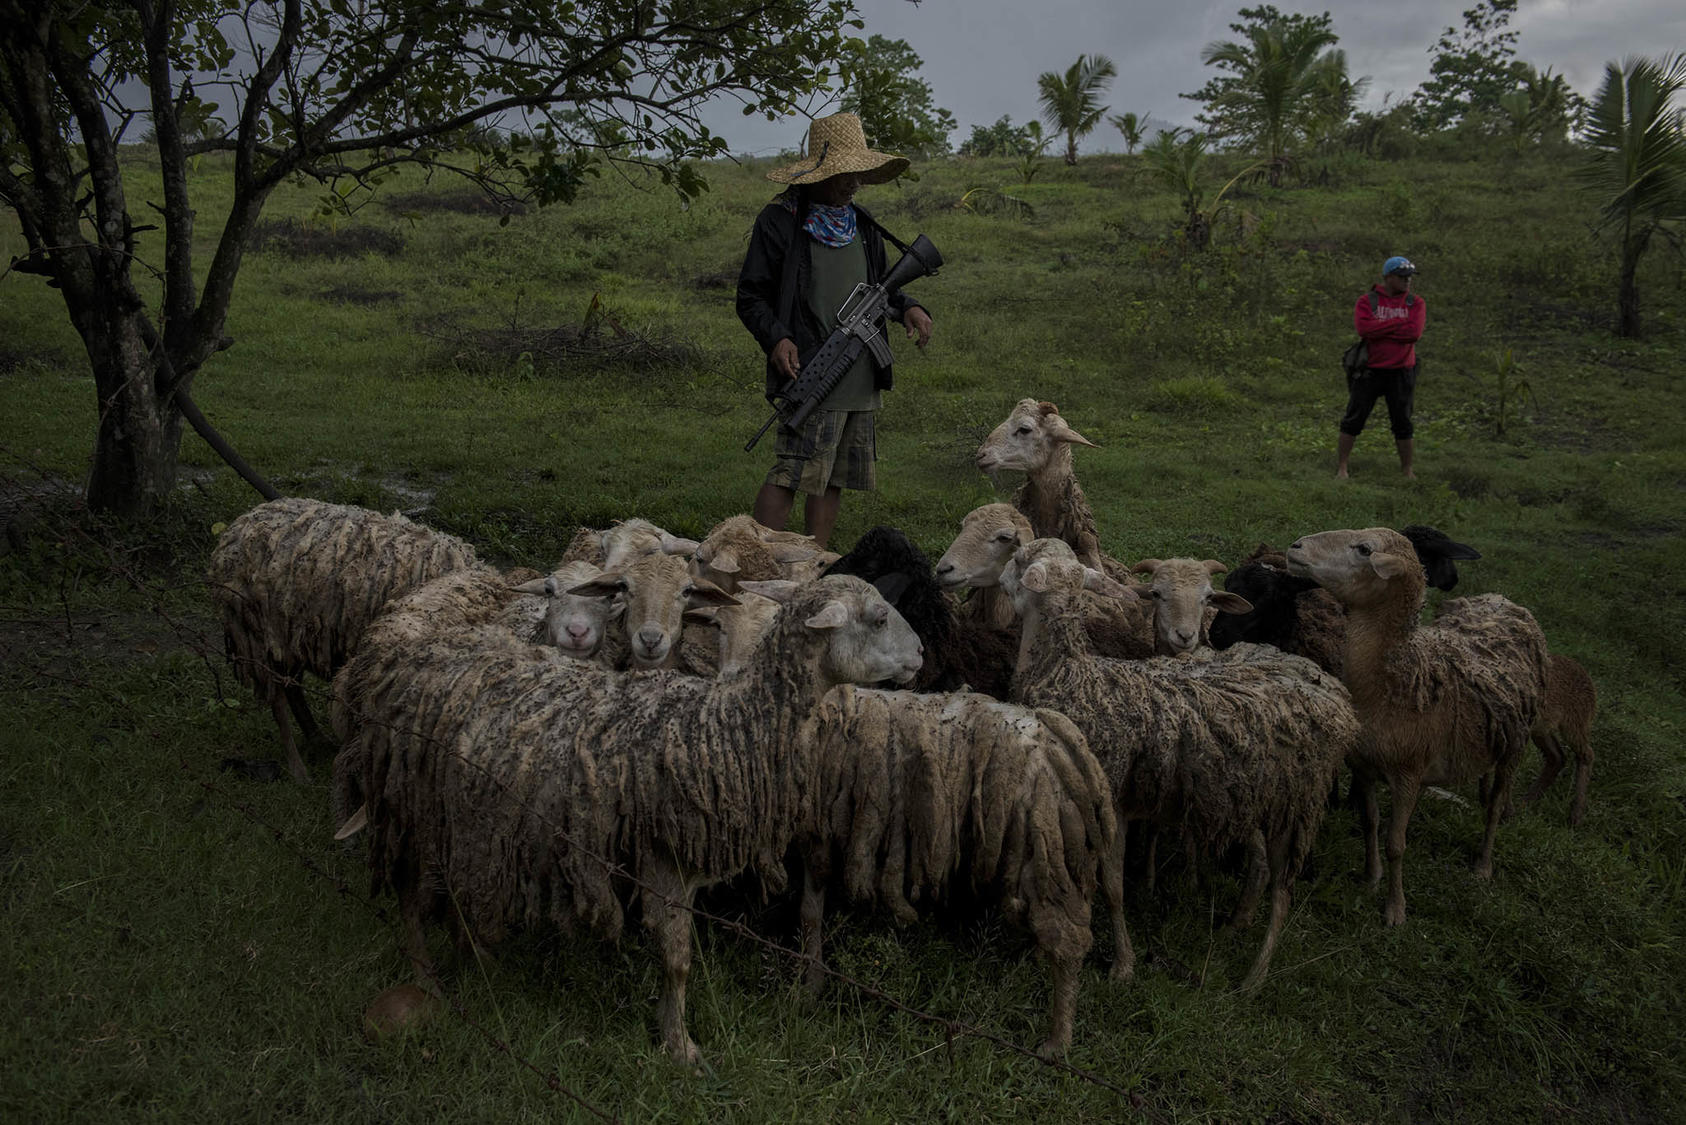 Commander Asiong, the self-appointed spokesman of Red God’s Army, a Christian militia unit, tends to his sheep in Kauran, Philippines, Sept. 19, 2017. (Jes Aznar/The New York Times)